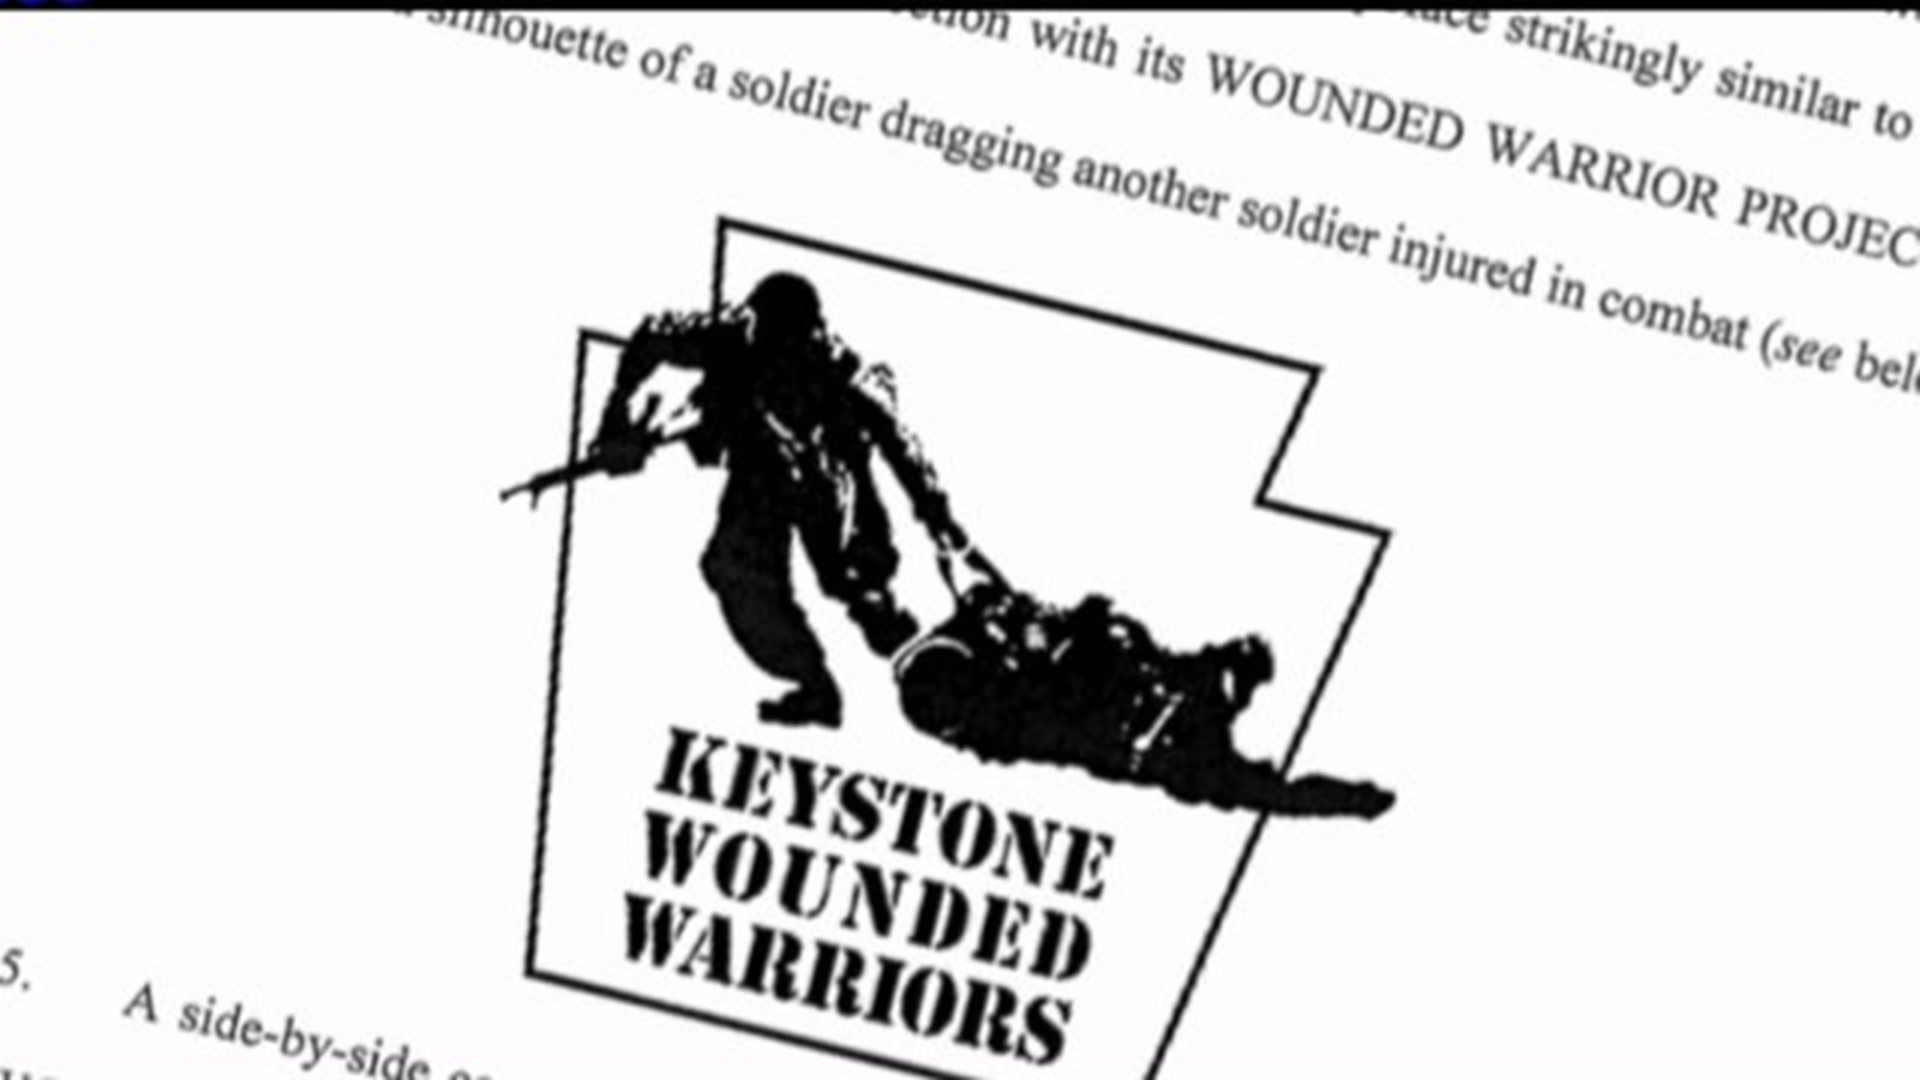 Keystone Wounded Warriors sued for